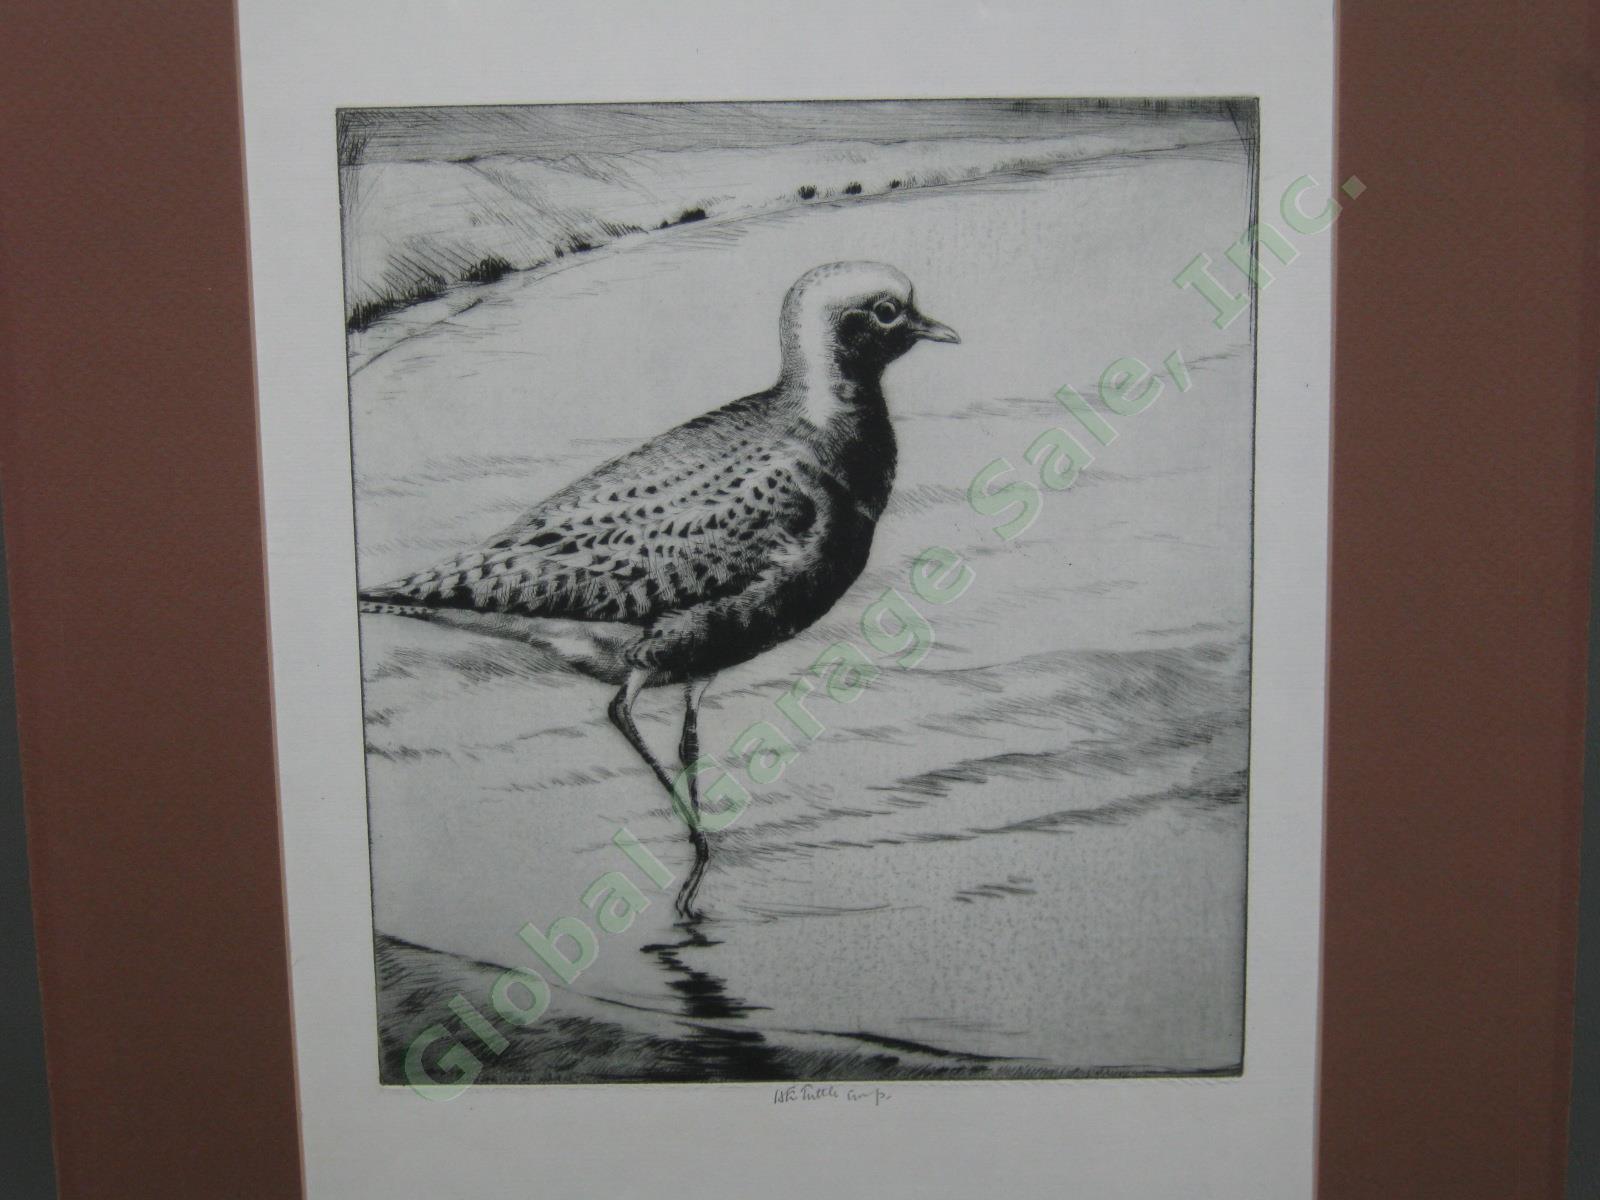 Original Signed Drypoint Etching H.E Henry Emerson Tuttle Black-Bellied Plover 1